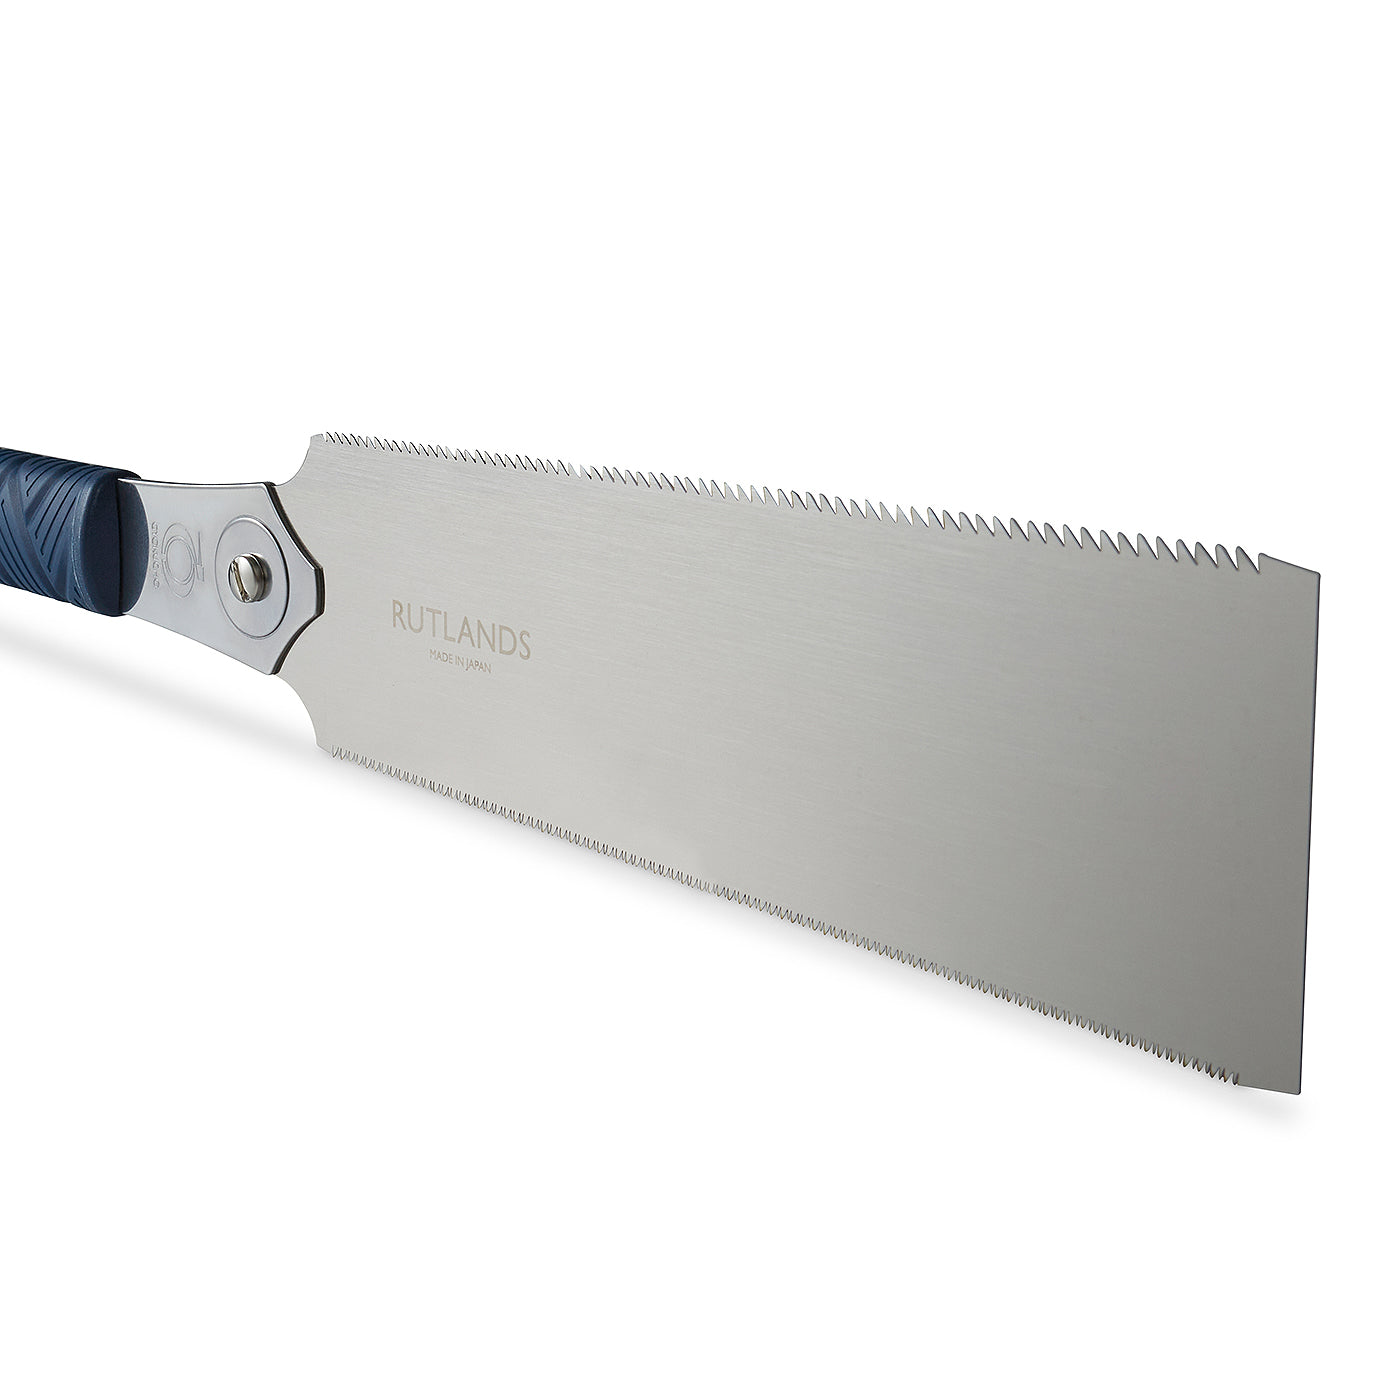 Japanese Ryoba – Day Saws | Rutlands Next Limited Delivery